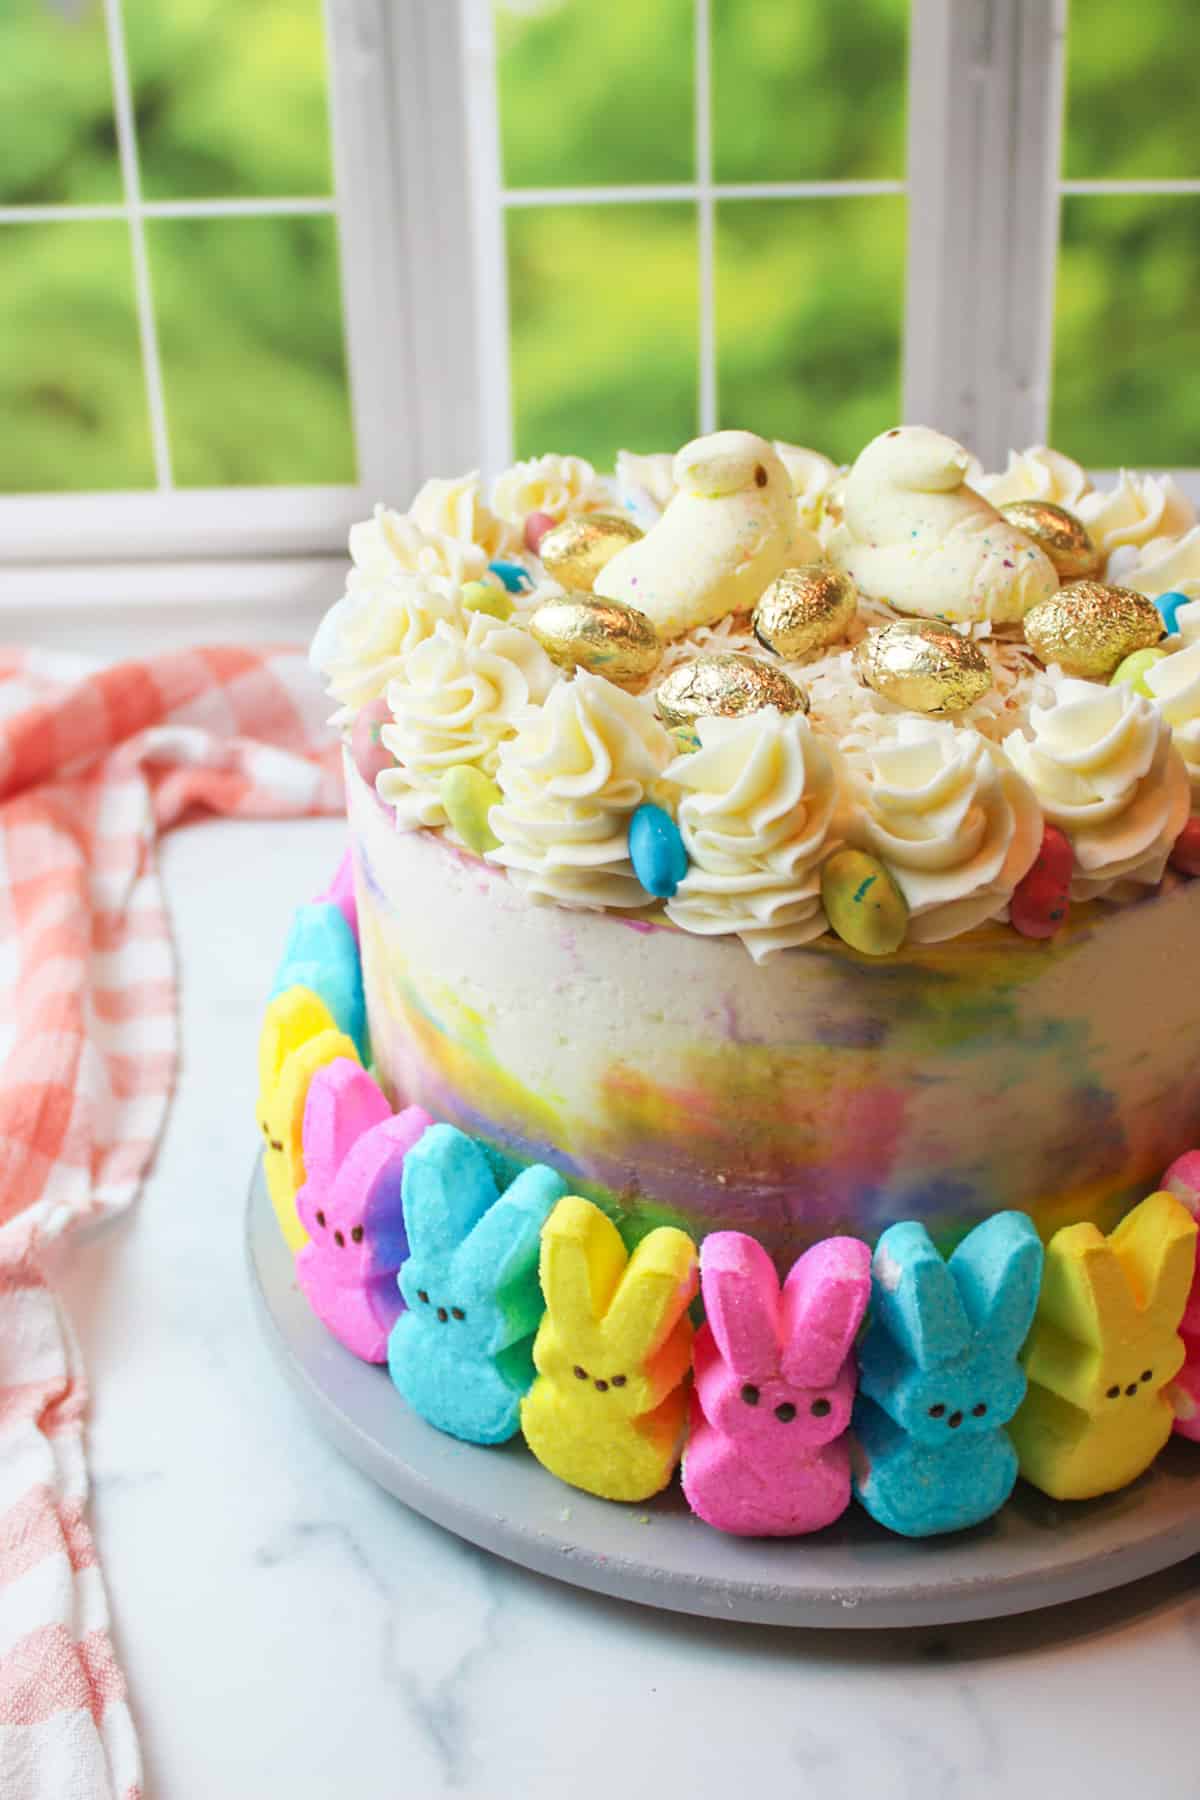 pink blue and yellow peeps around a colorful easter cake topped with shredded cocoanut and golden egg candies.